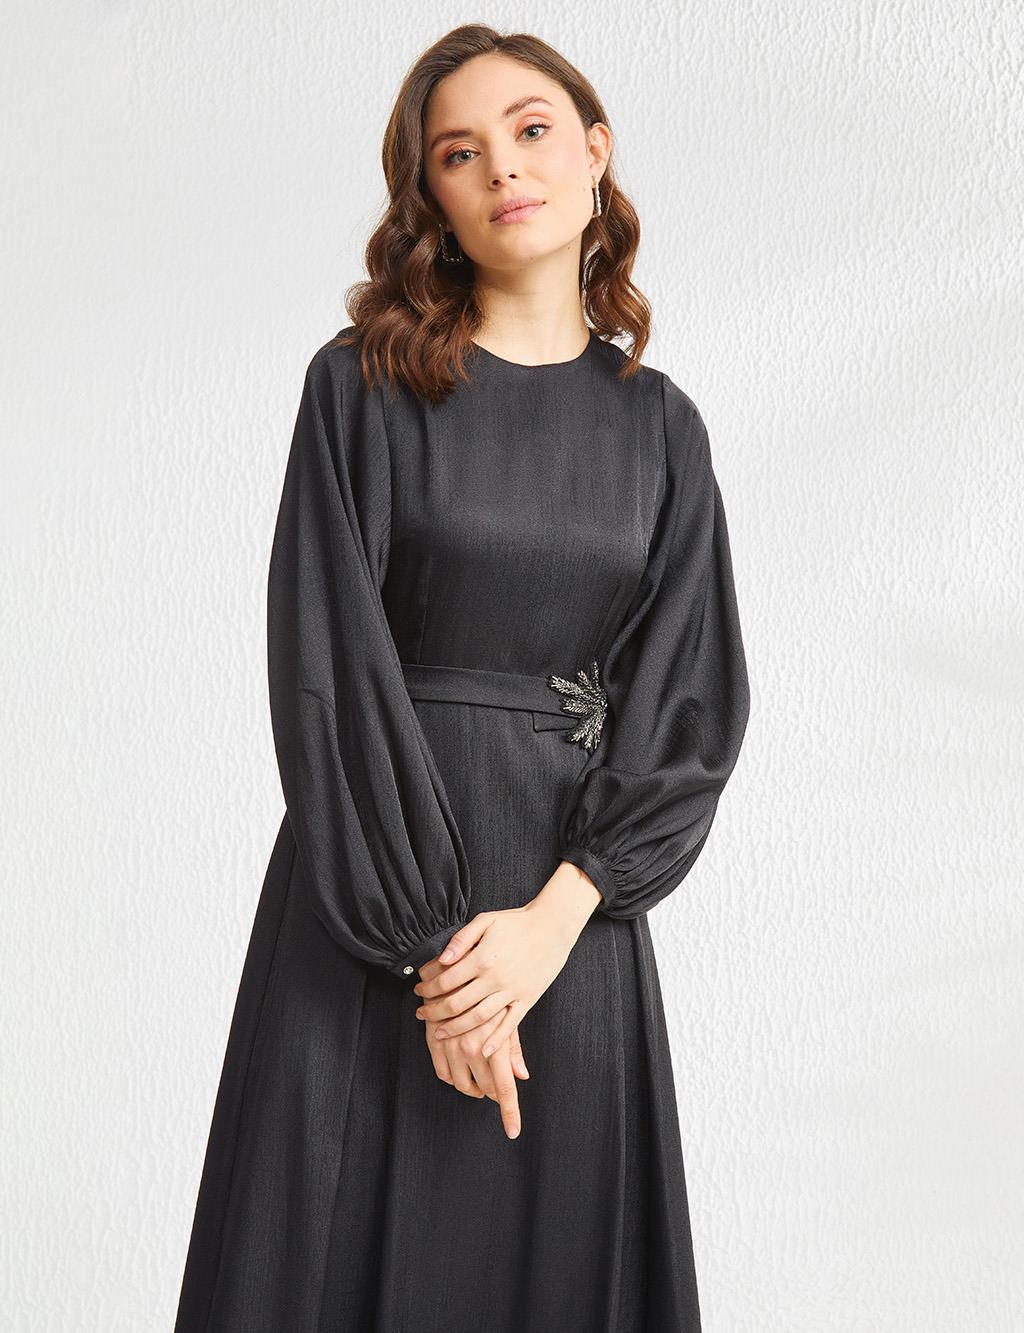 Embroidered Wide Pleated Round Neck Collar Long Dress Siyah